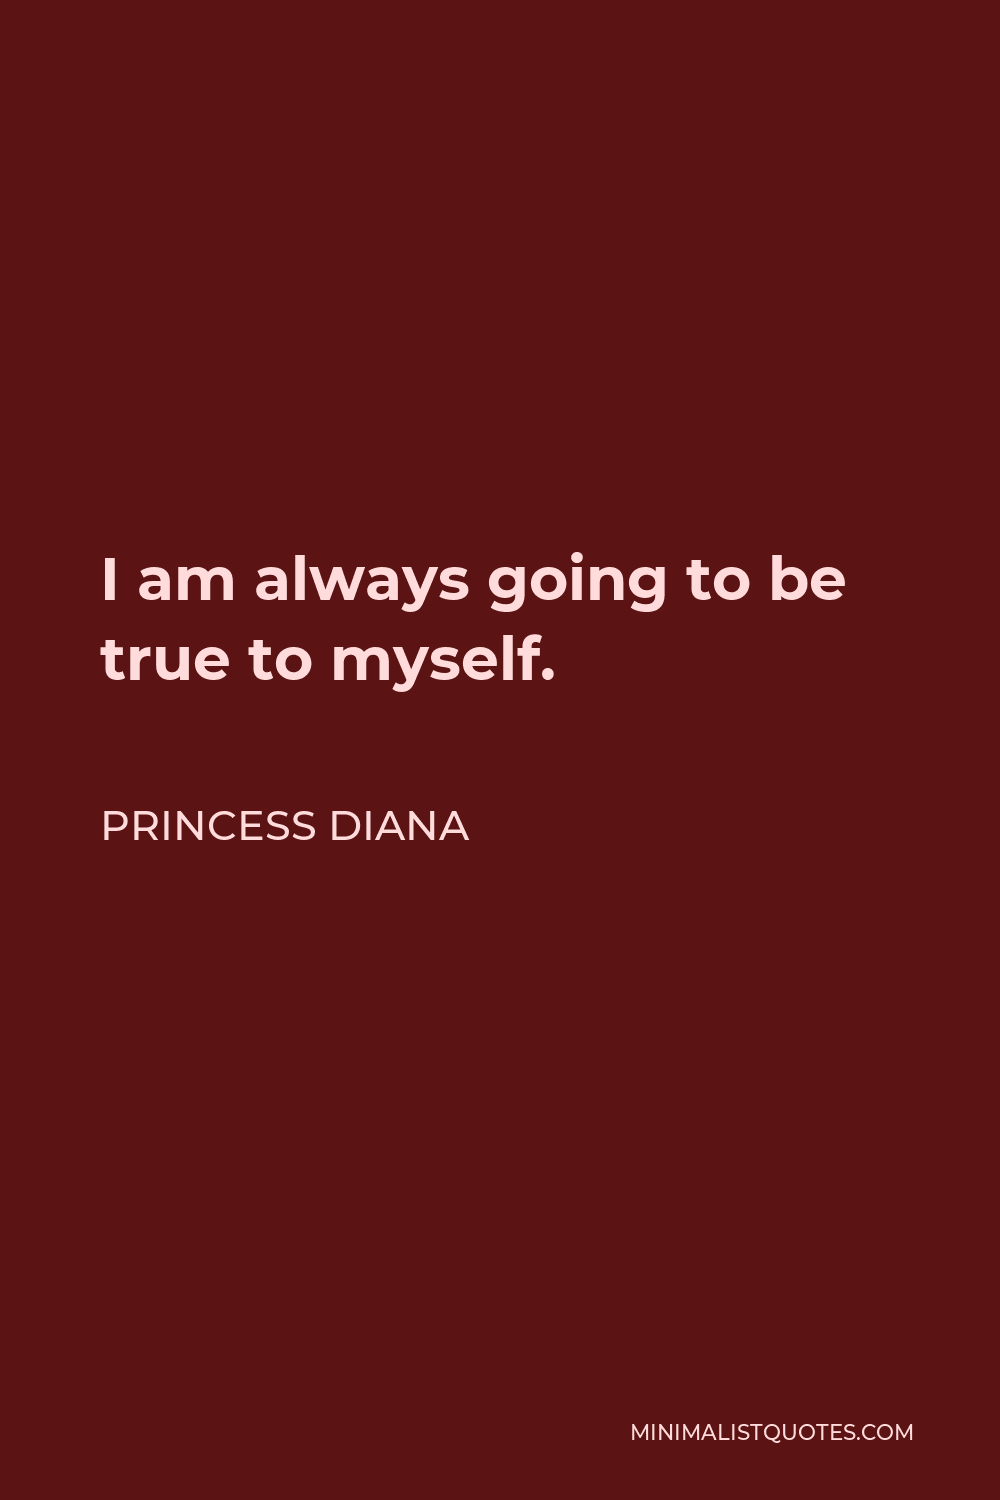 Princess Diana Quote - I am always going to be true to myself.